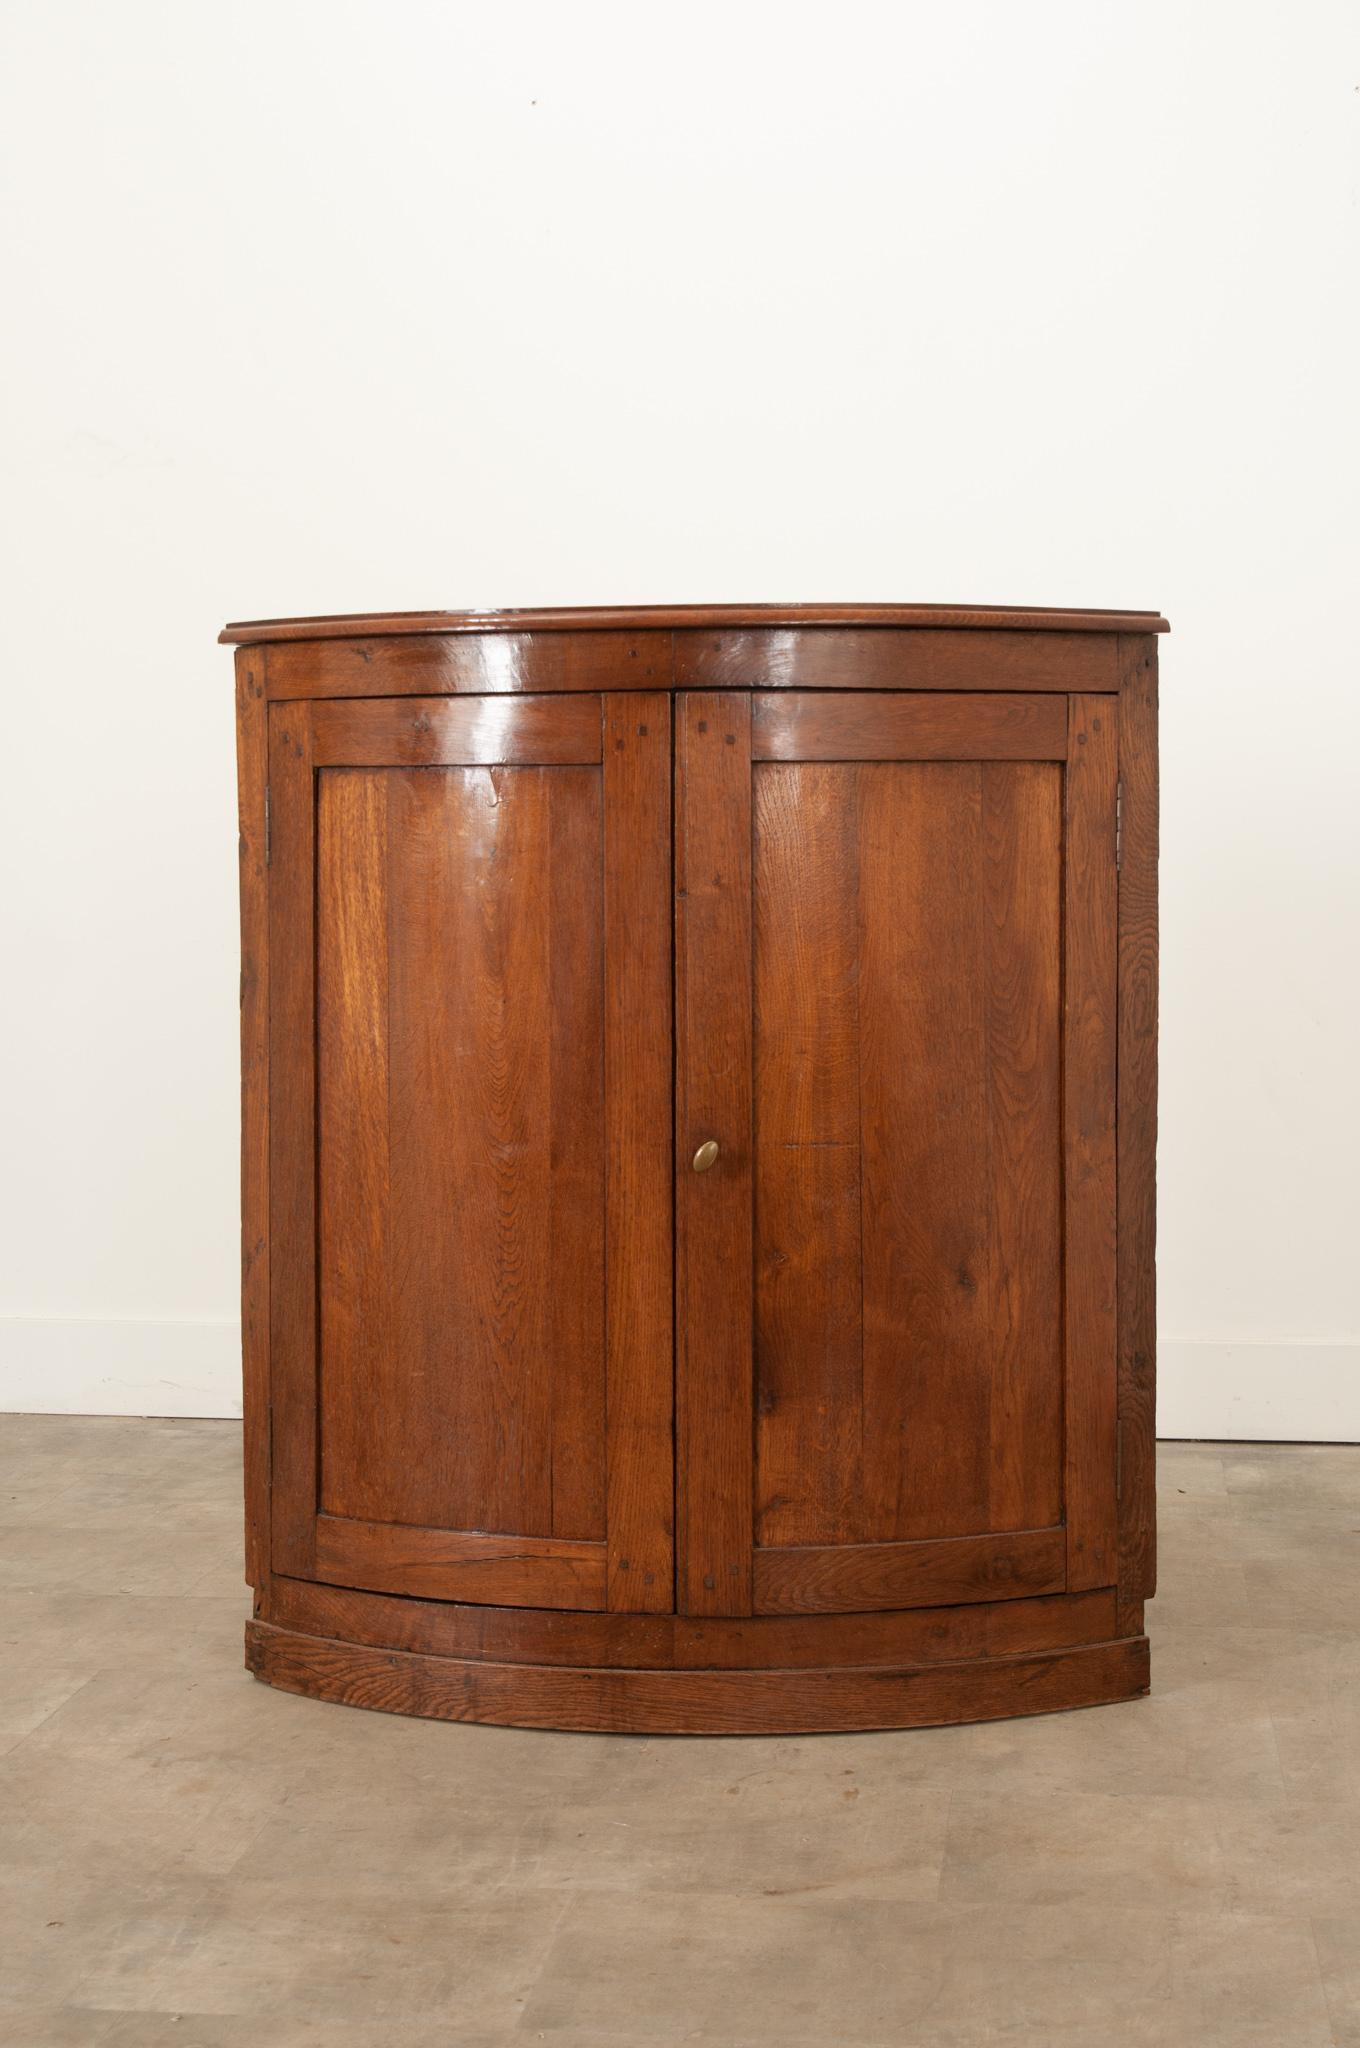 A sleek and simple French solid oak corner cabinet that will add a bit more storage space without taking up too much room. Hand-crafted in the 19th century, its polished demilune top showcases the rich tones and patina of the oak. The body is curved